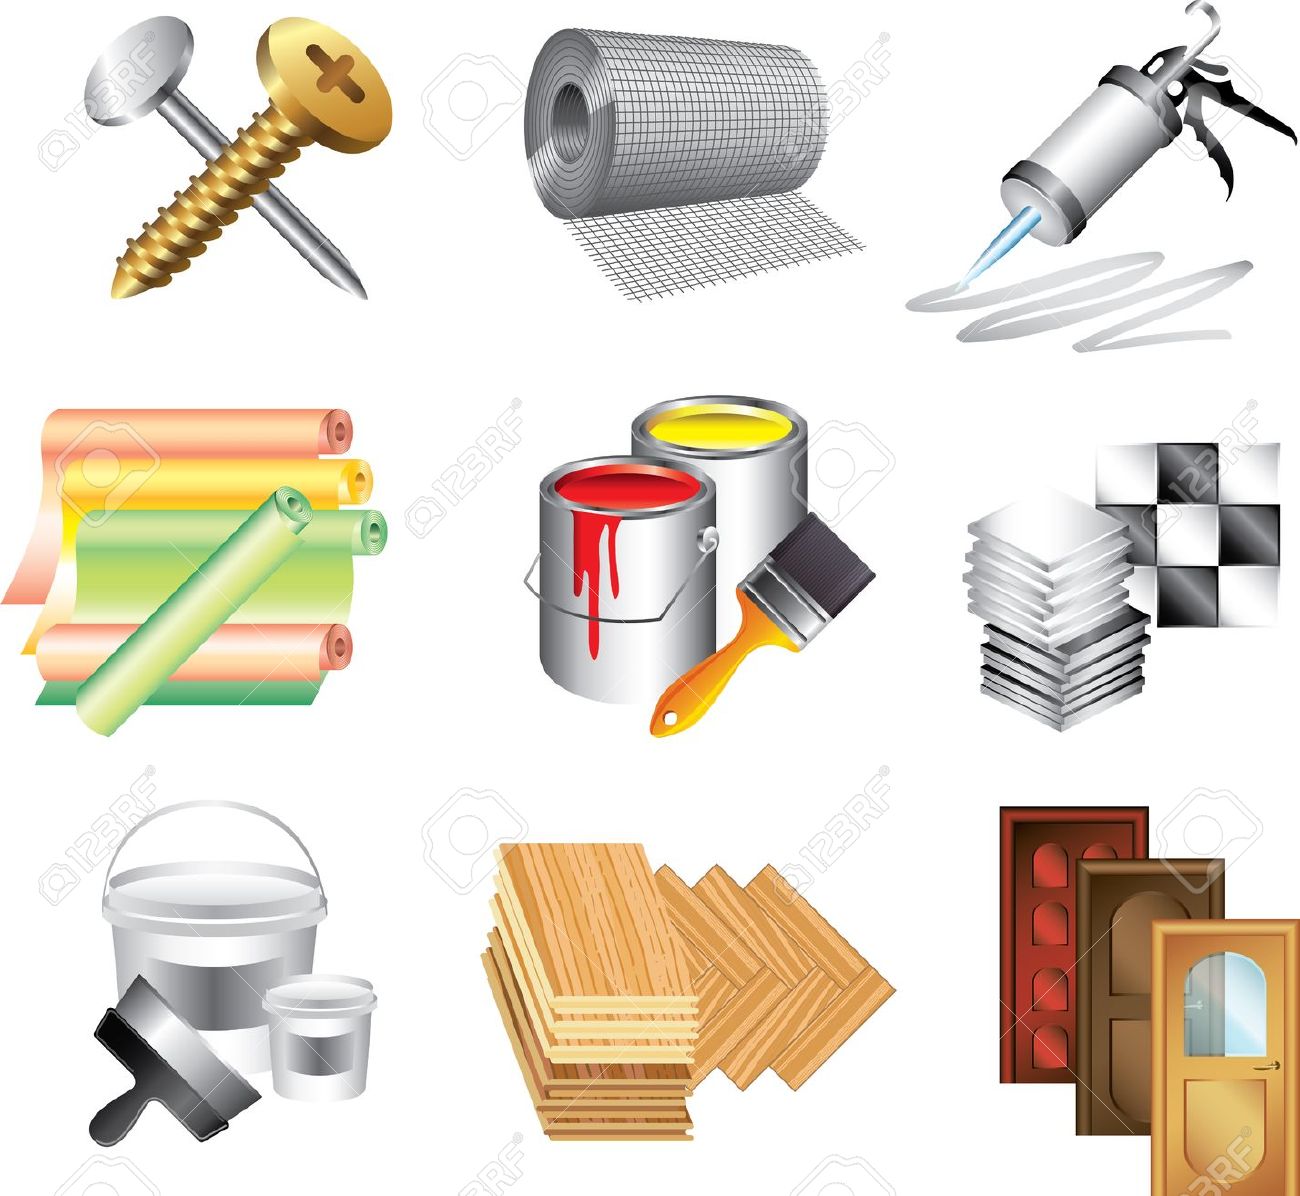 Construction material clipart 20 free Cliparts | Download images on